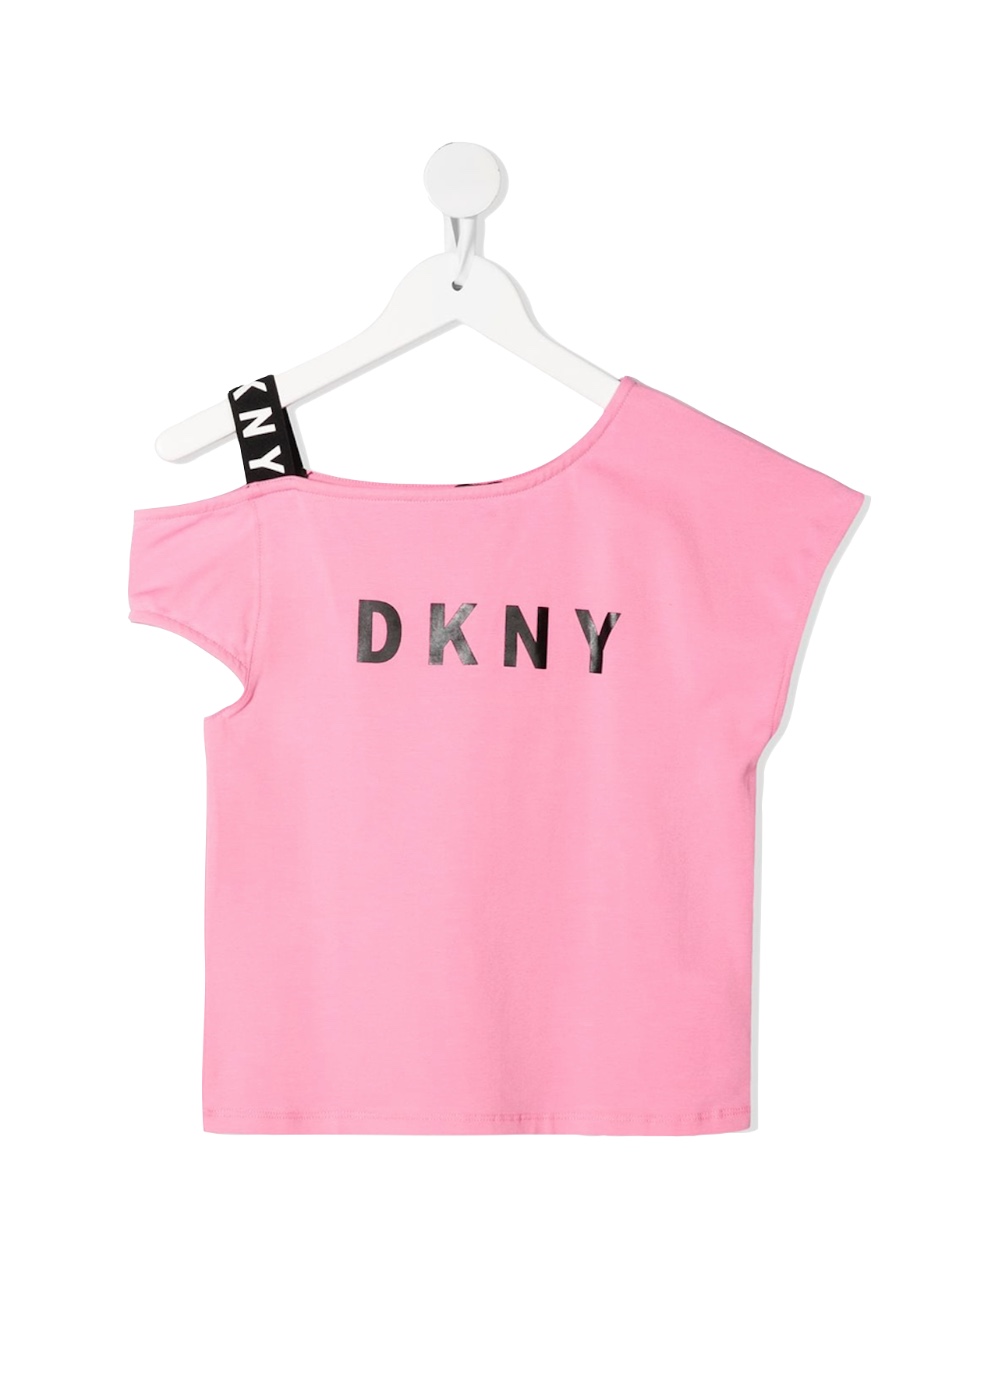 Featured image for “DKNY T-SHIRT ASIMMETRICA”